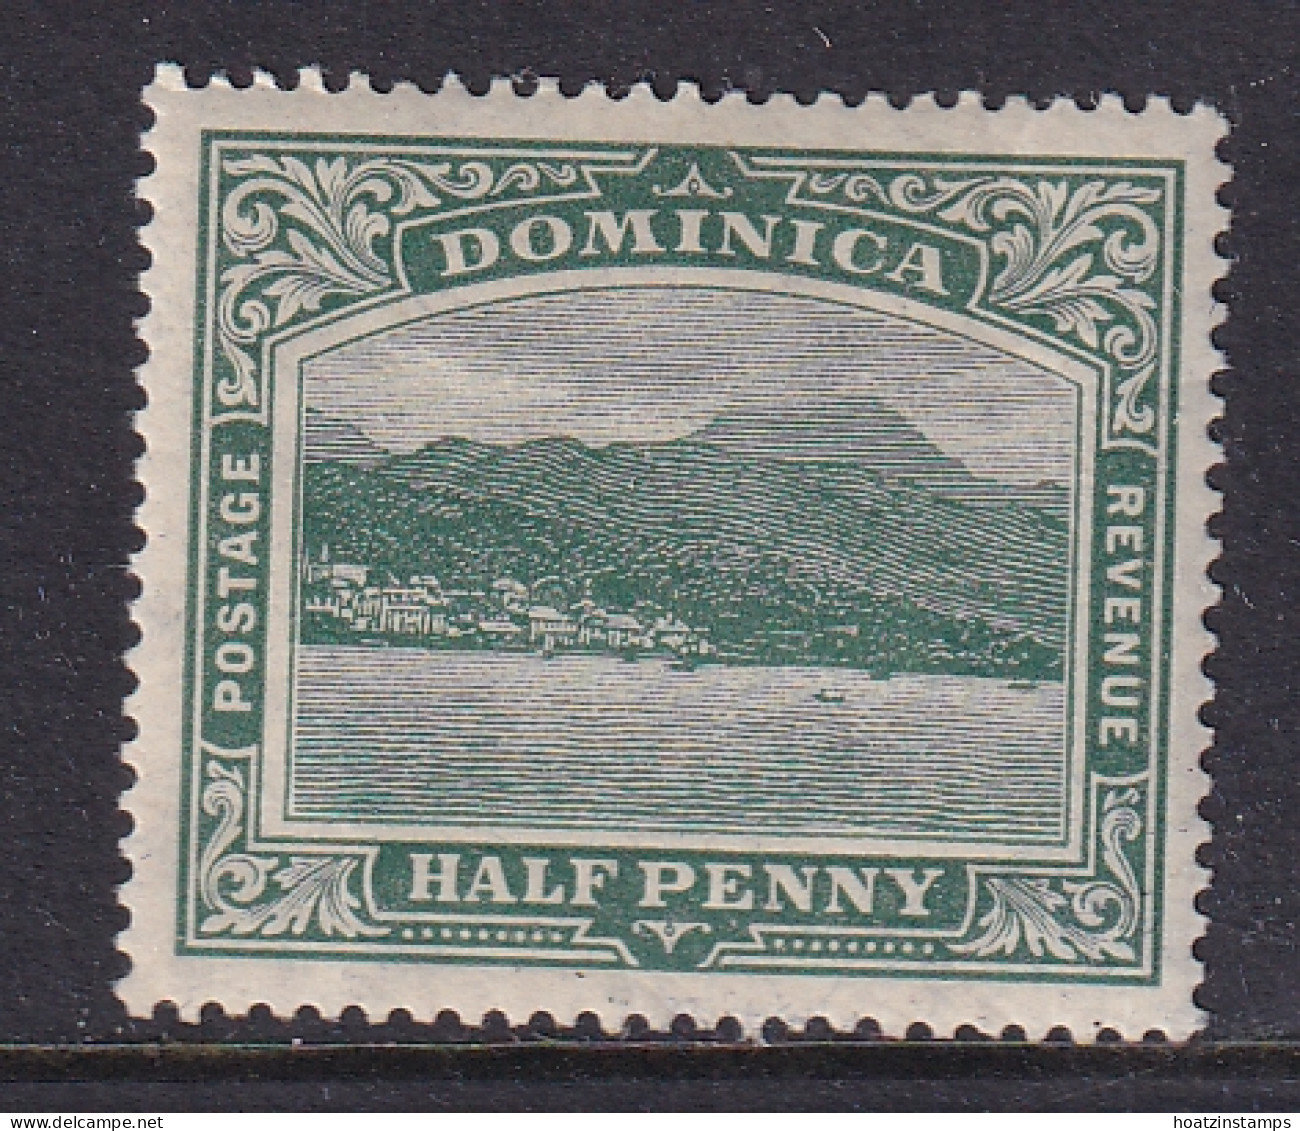 Dominica: 1908/20   Rouseau From The Sea    SG47aw    ½d   Blue-green  [Wmk: Crown To Left Of CA]    MH - Dominica (...-1978)